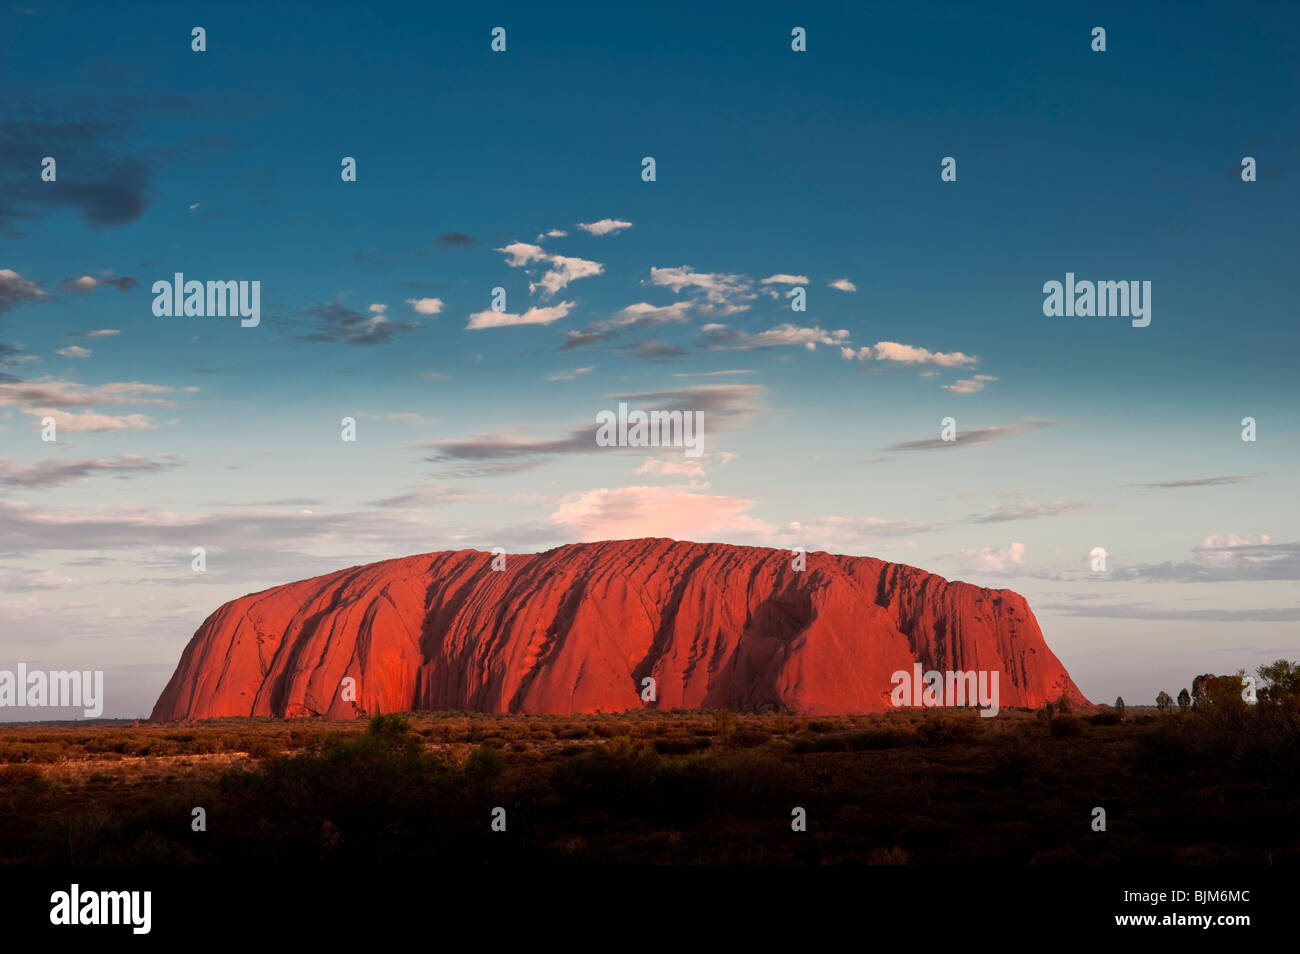 Uluru, also known as Ayers Rock, at sunset. Northern Territory, Australia Stock Photo